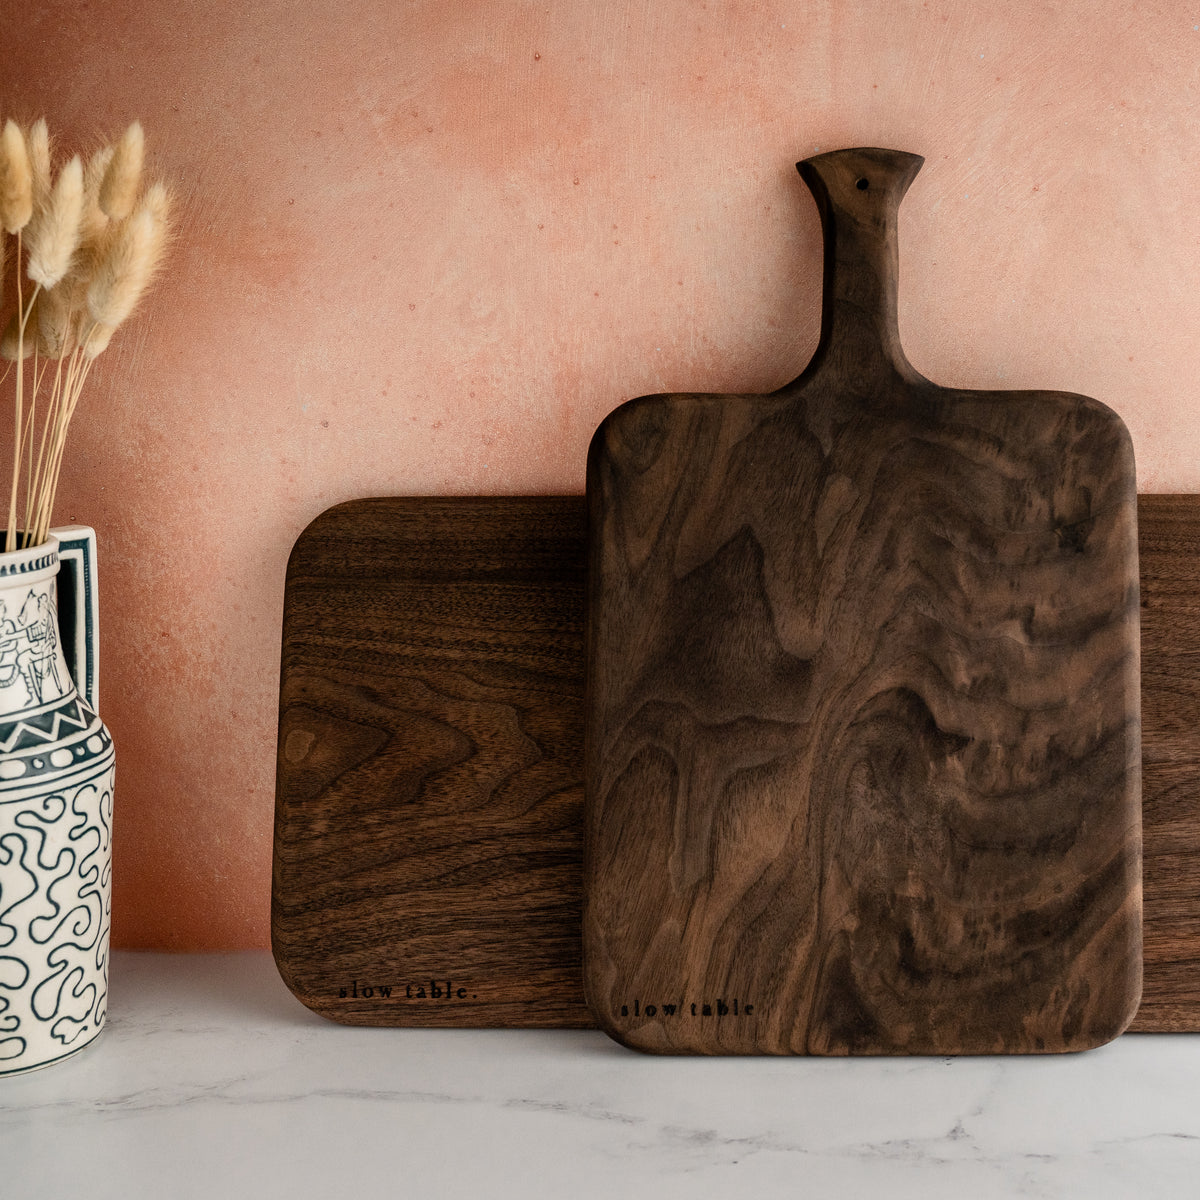 image of two sizes of solid walnut wood boards, propped against a kitchen backsplash on a marble countertop. Both boards have a beautiful fine and unique wood grain.